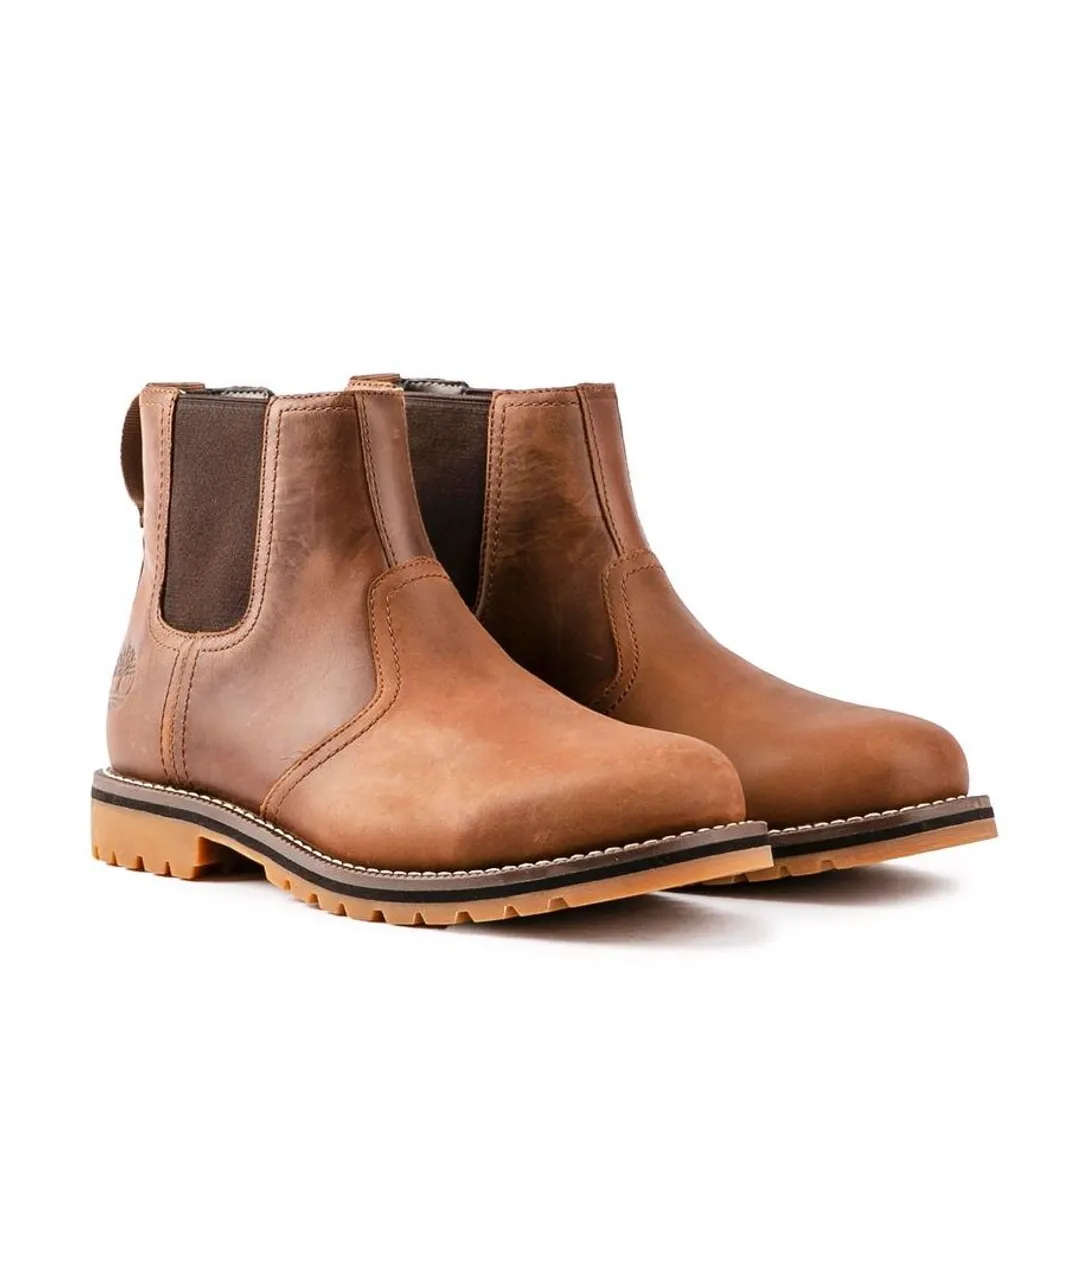 Timberland Mens Larchmont Chelsea Boots - Brown